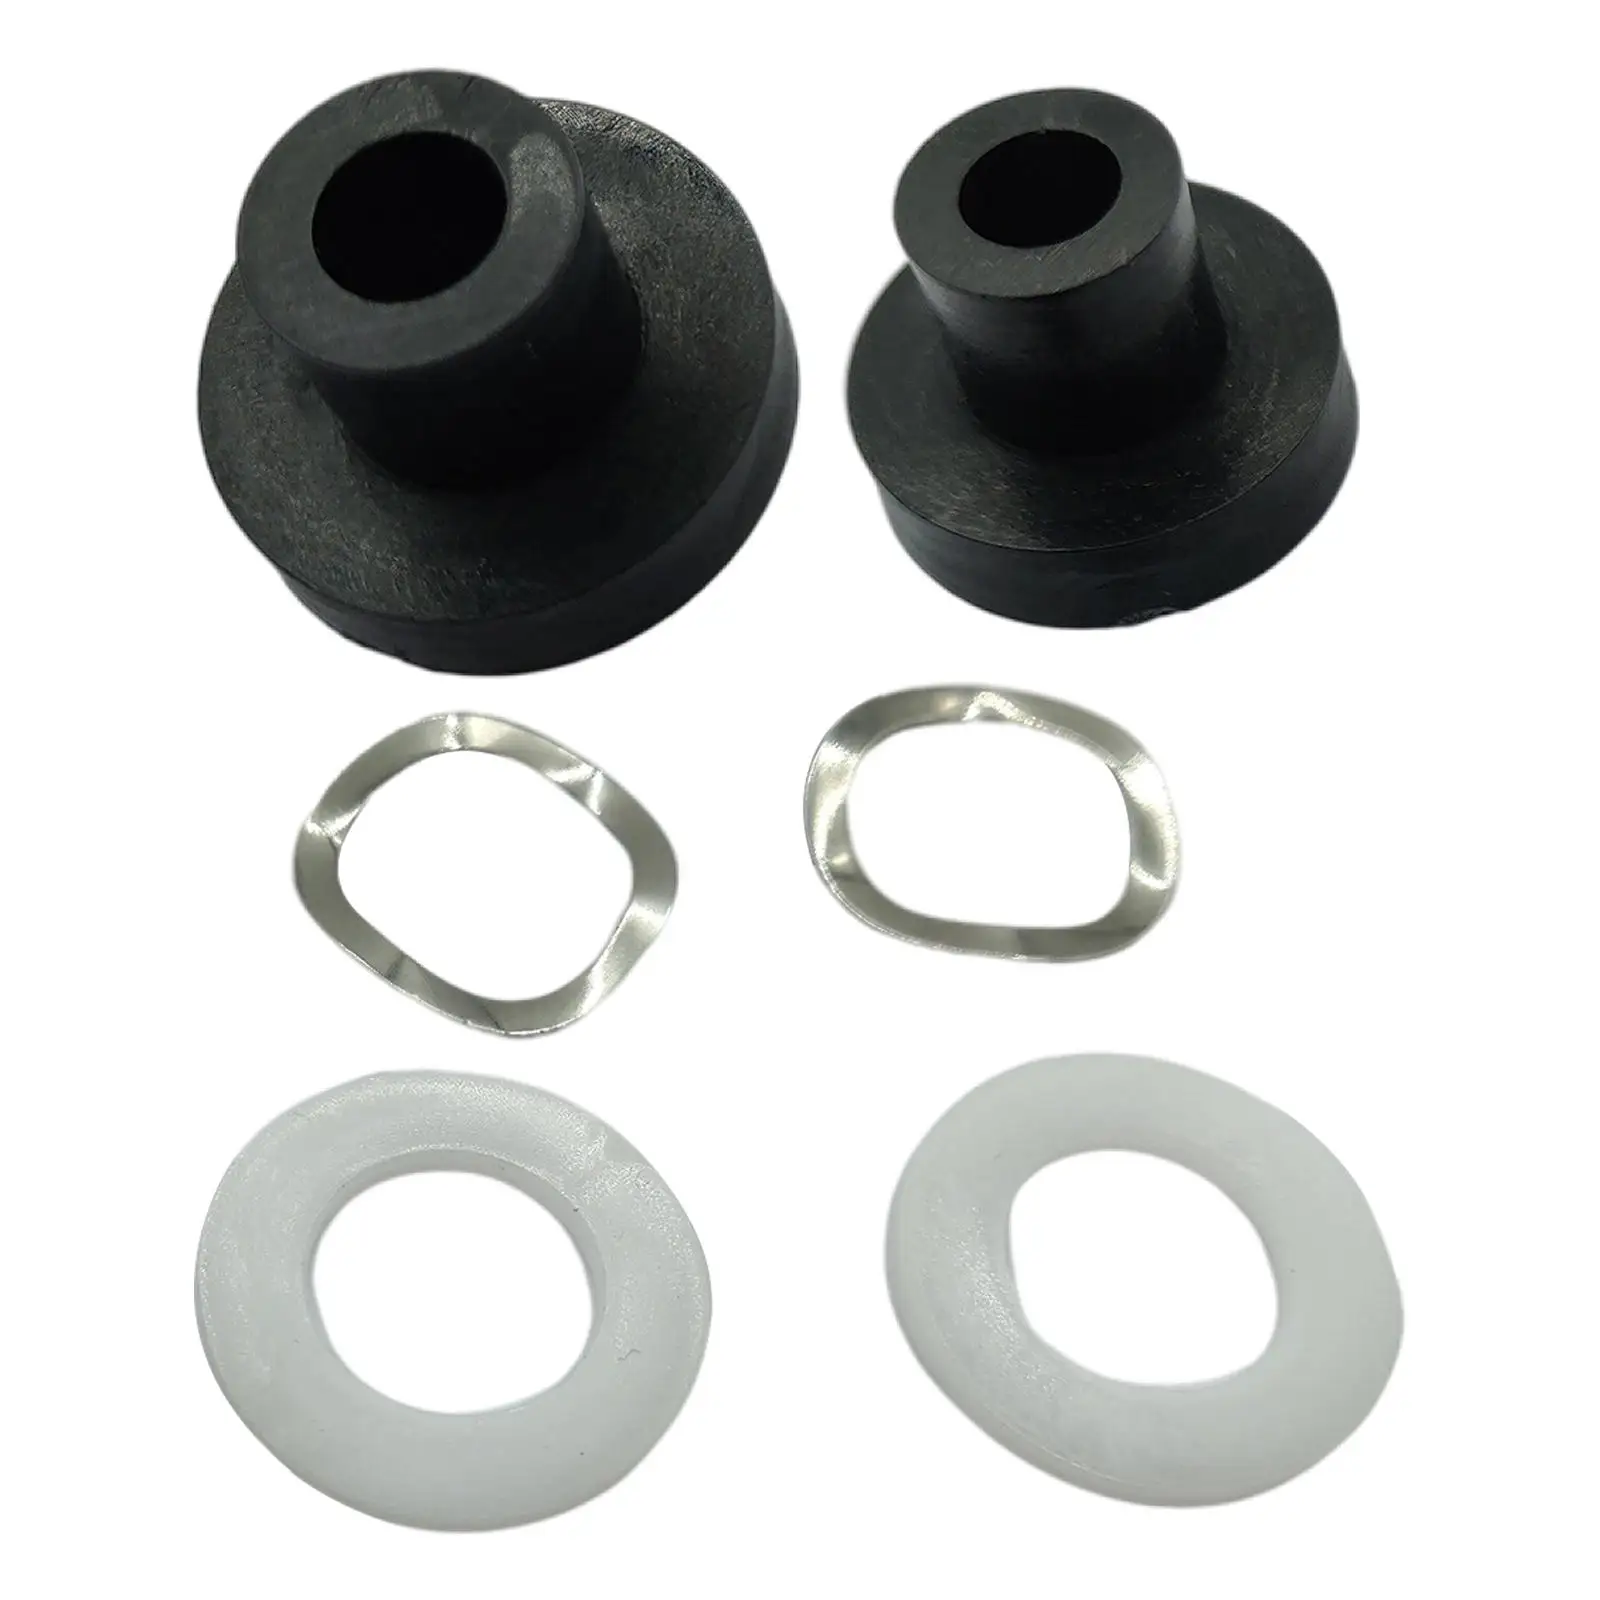 2Pcs Car Window Bushings 909-925 Direct Replaces Premium High Performance Easy to Install Accessories Fits for Mazda Miata 90-05